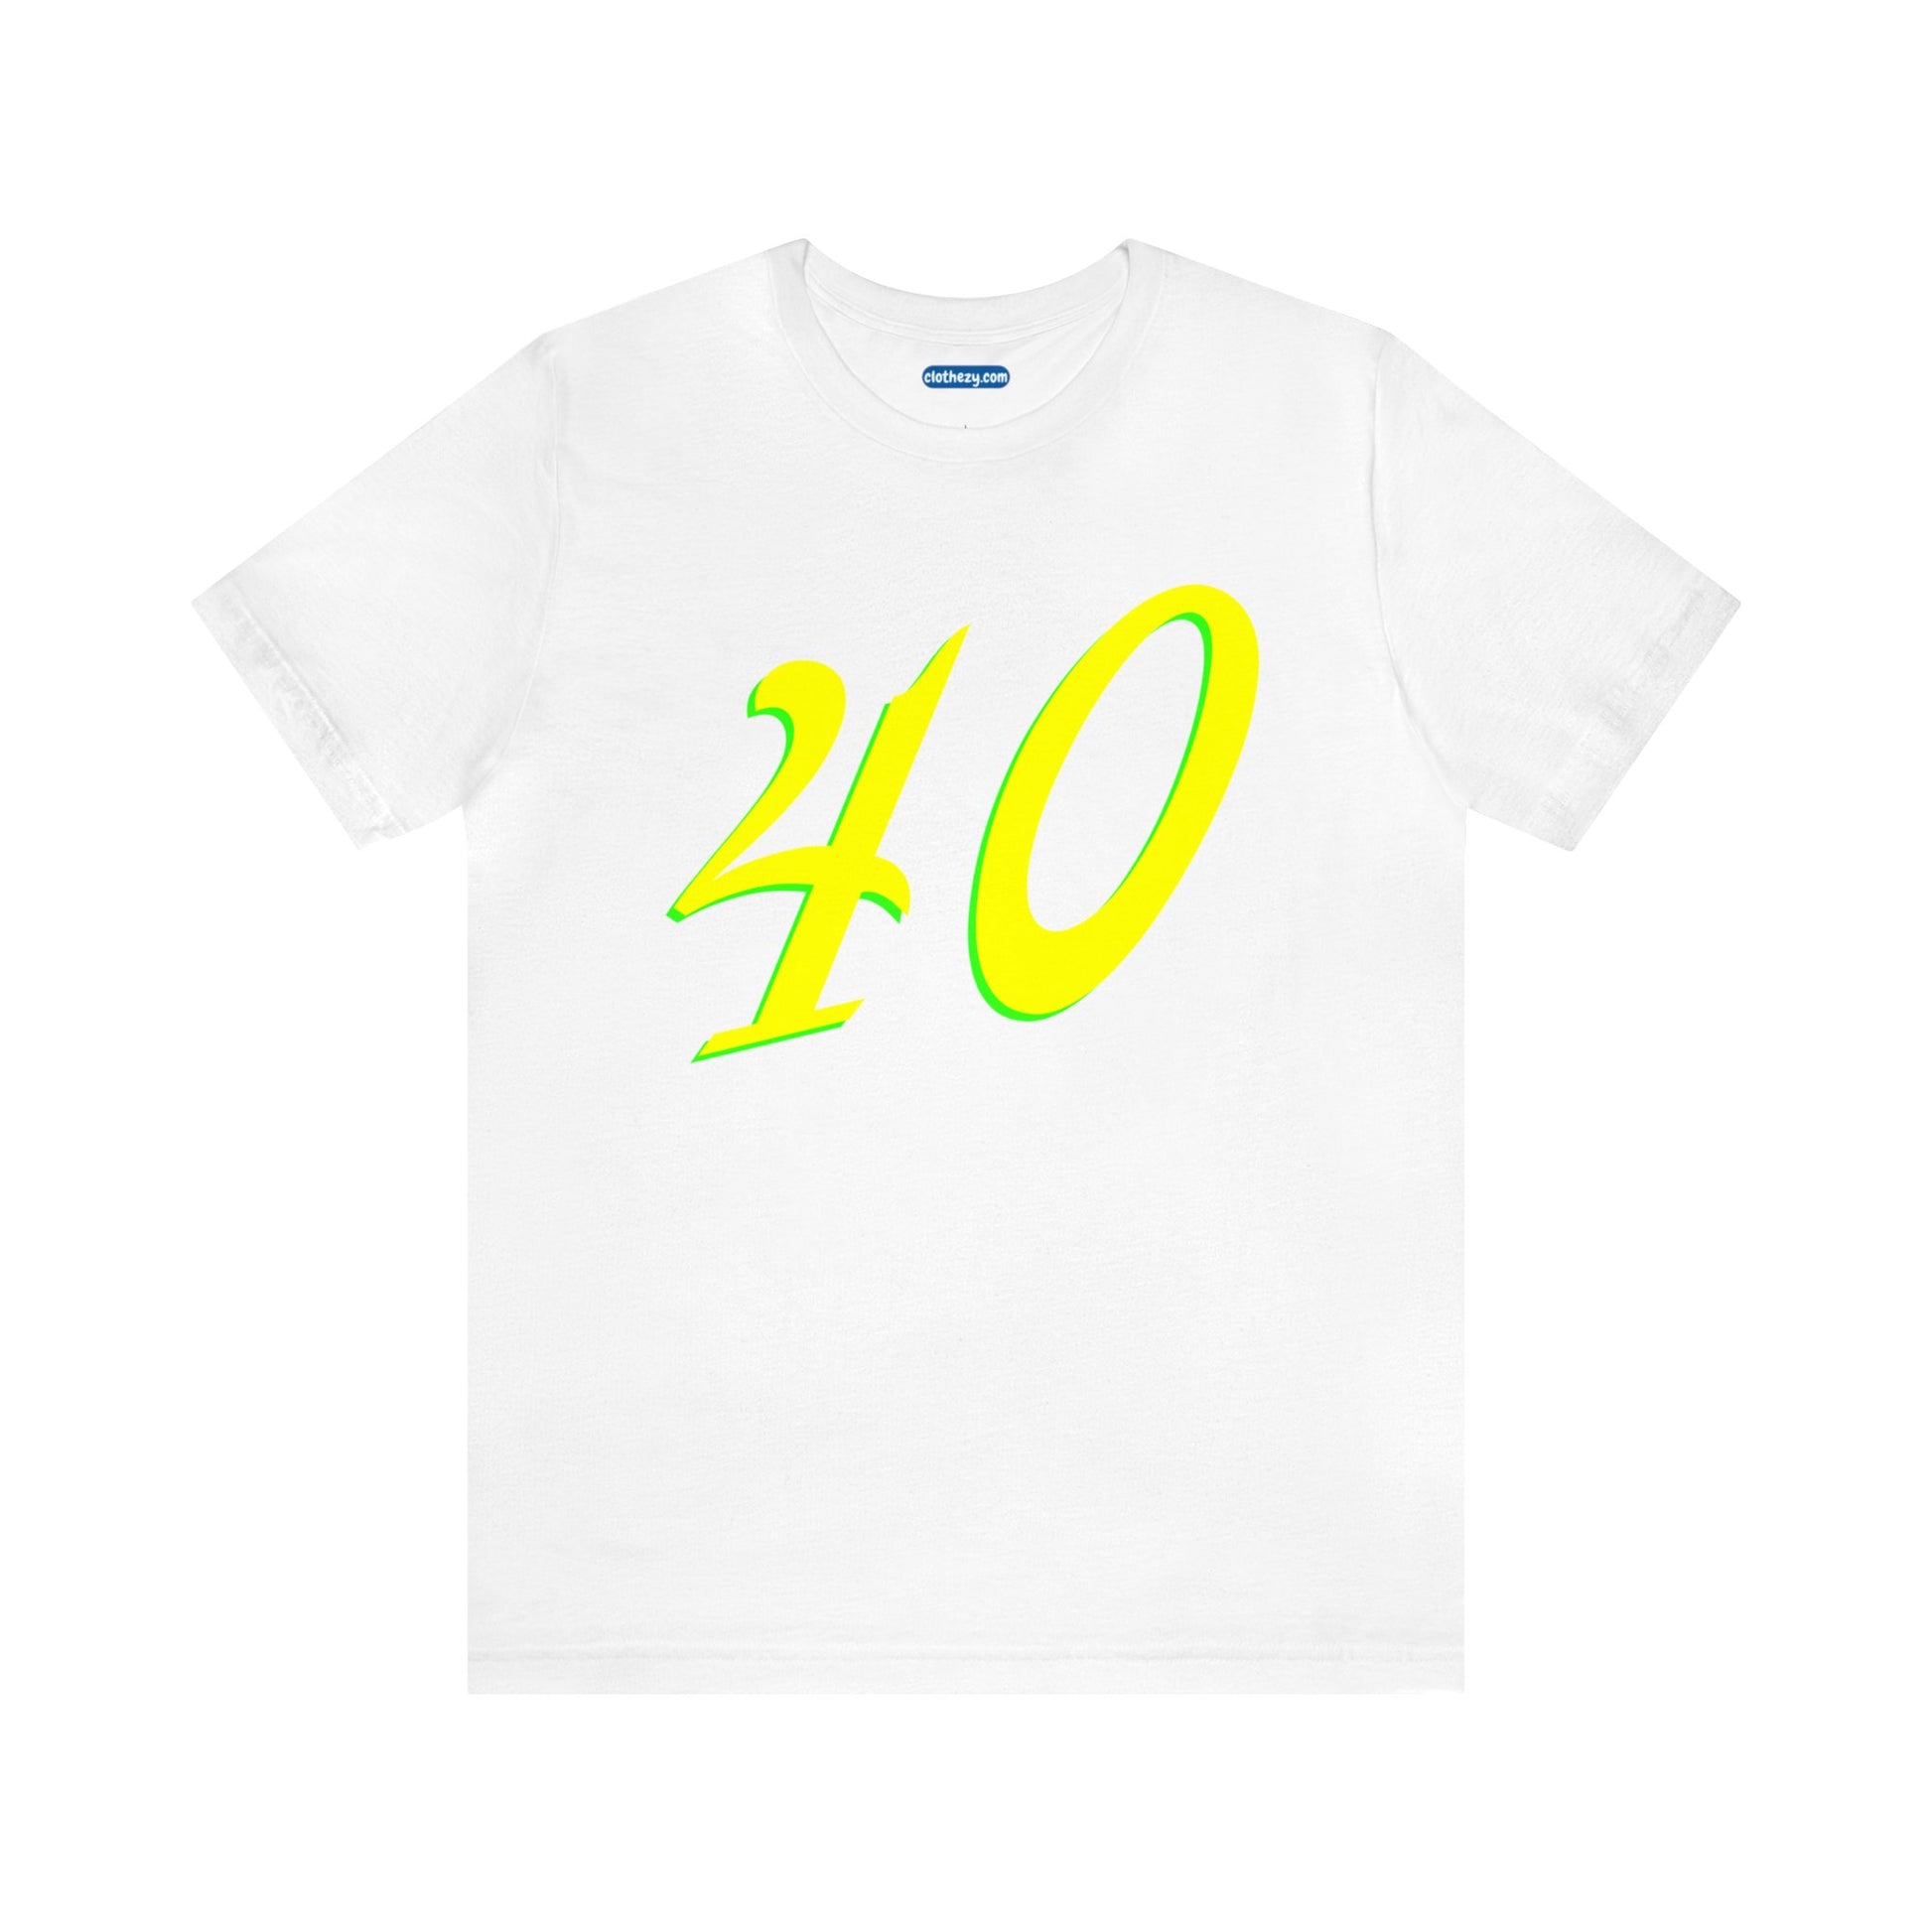 Number 40 Design - Soft Cotton Tee for birthdays and celebrations, Gift for friends and family, Multiple Options by clothezy.com in White Size Small - Buy Now